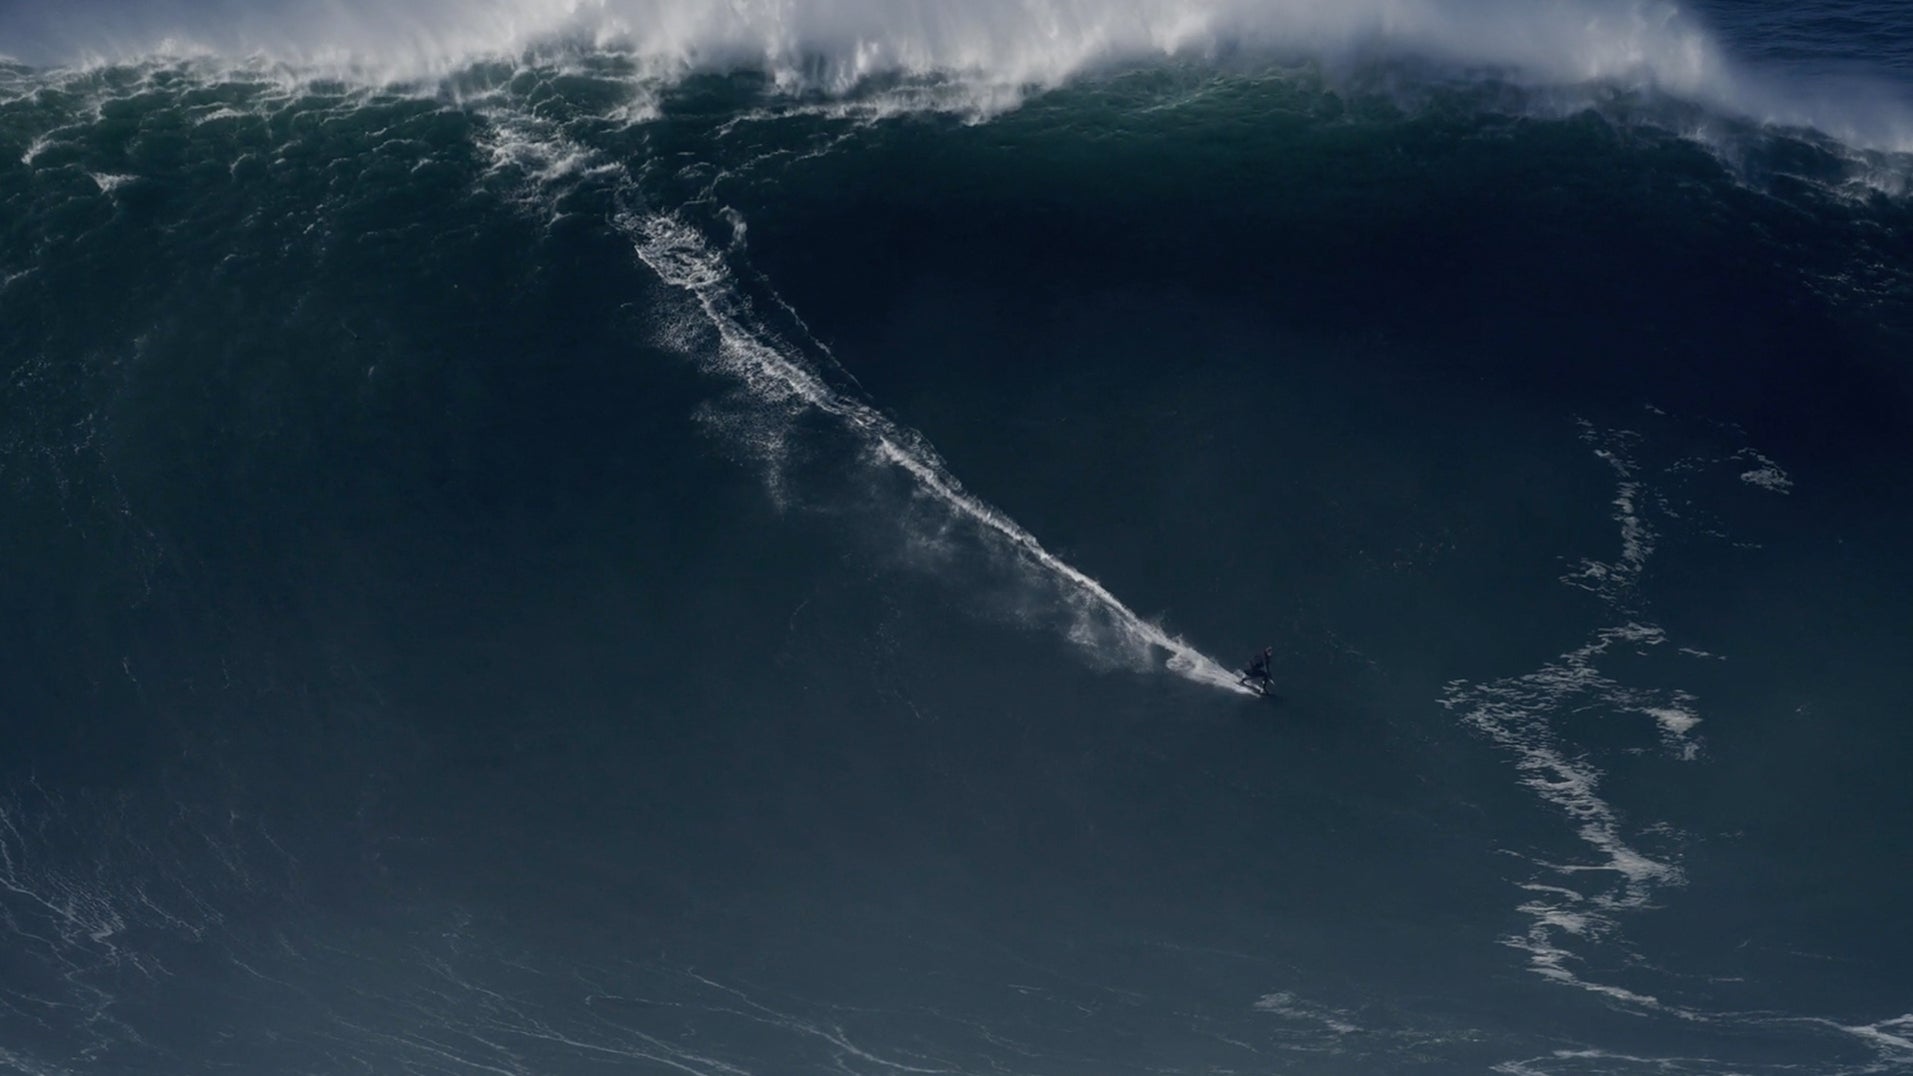 Sebastian Steudtner reached a height of 86 feet while riding waves in Portugal